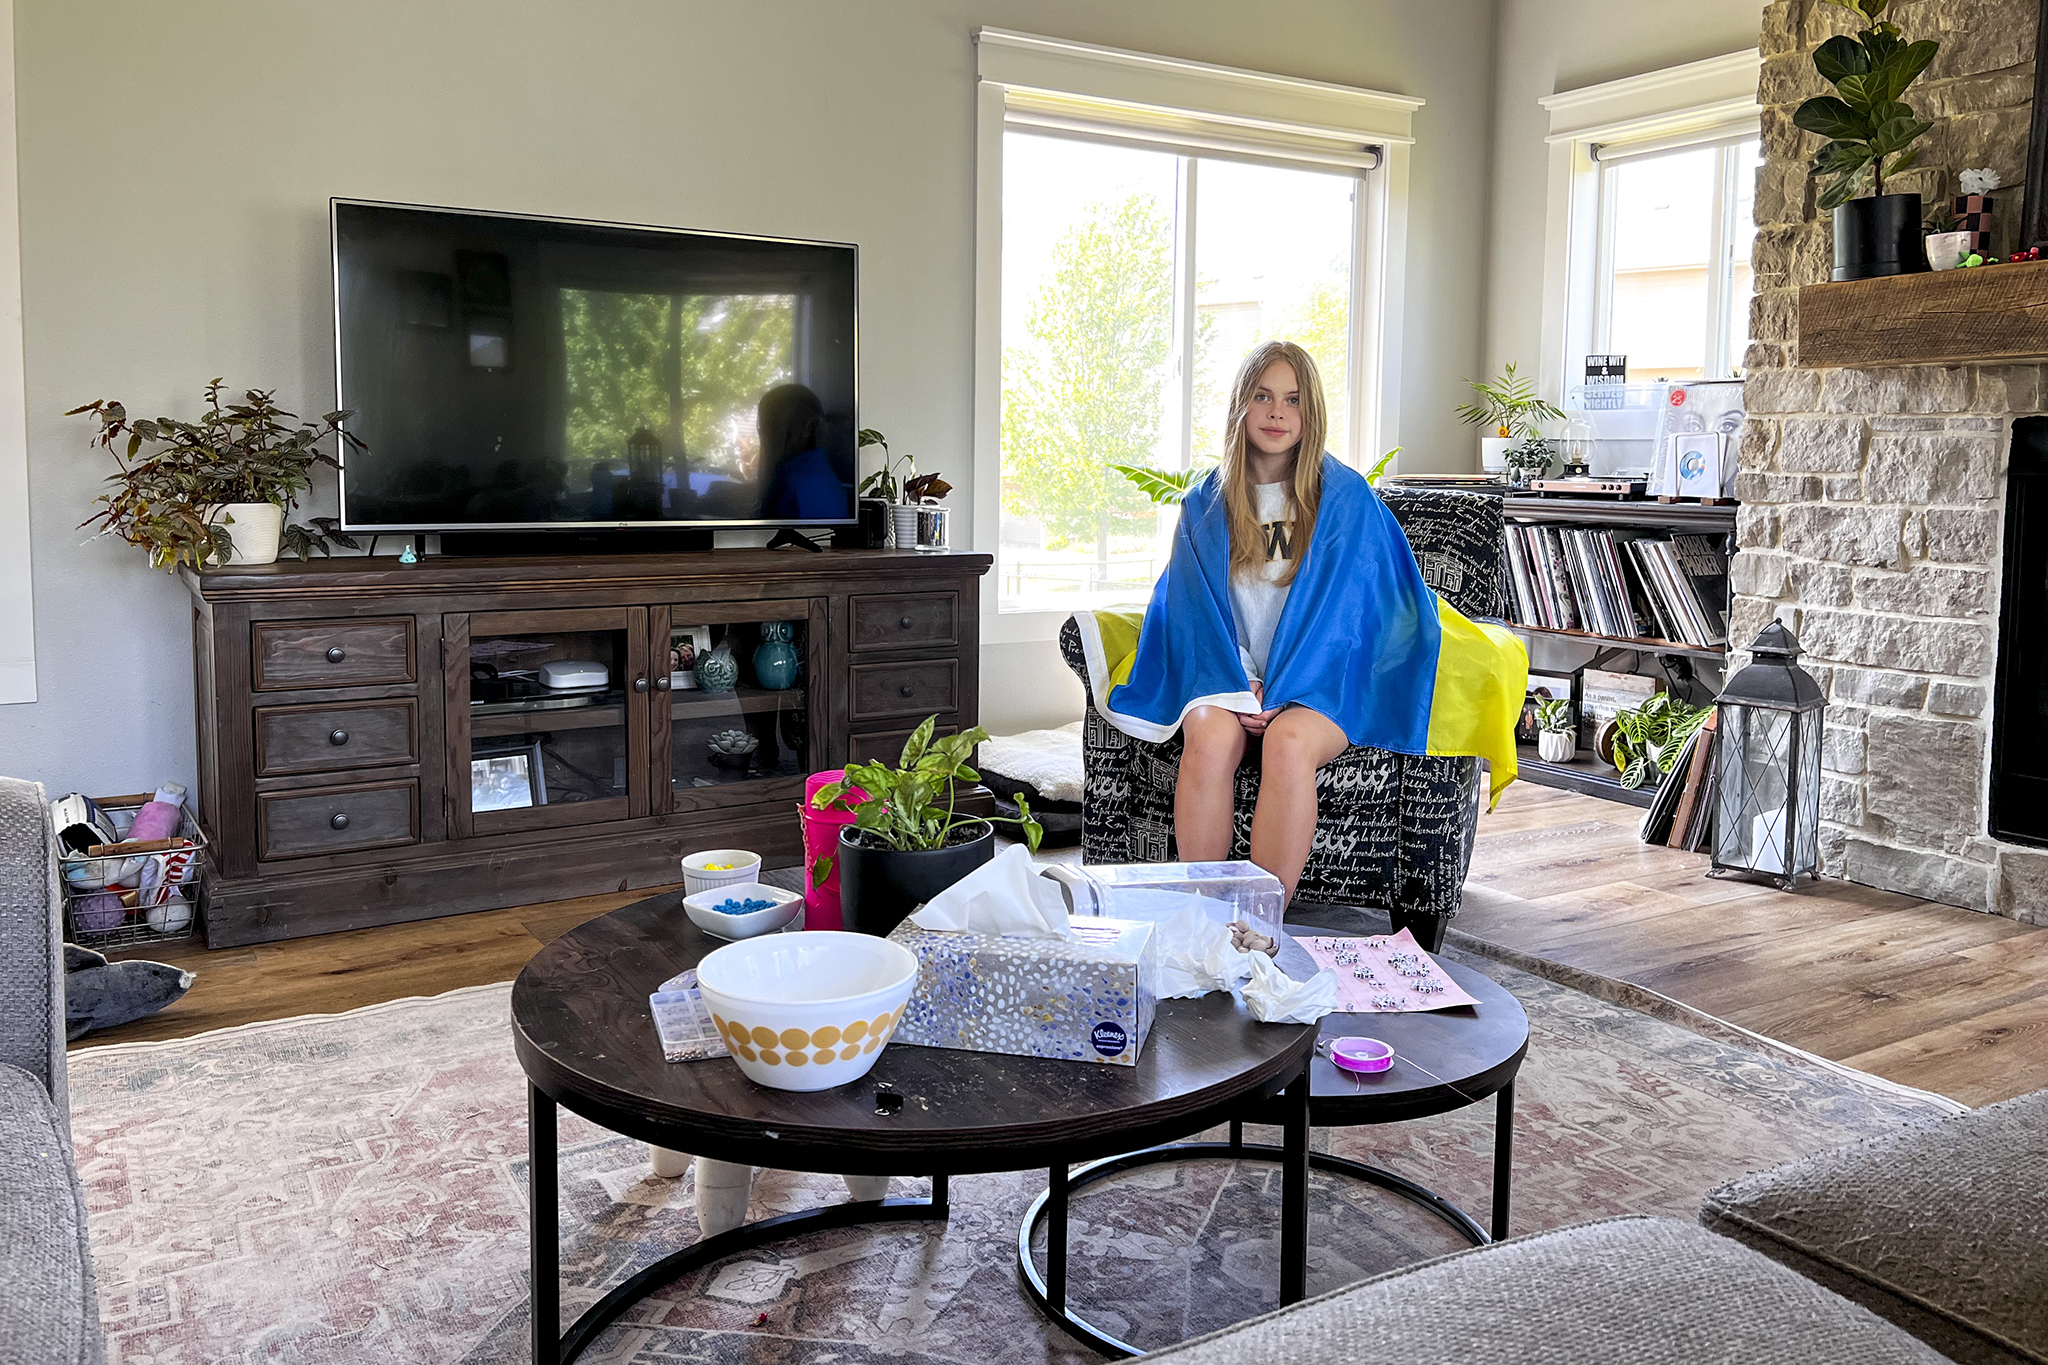 Liza sits in a chair in her host family’s living room. To her right is their TV, in front of her is a coffee table with various household objects like tissues, snacks, a house plant and friendship bracelets. Liza is wearing a gray sweatshirt with a Ukrainian flag draped around her shoulders.